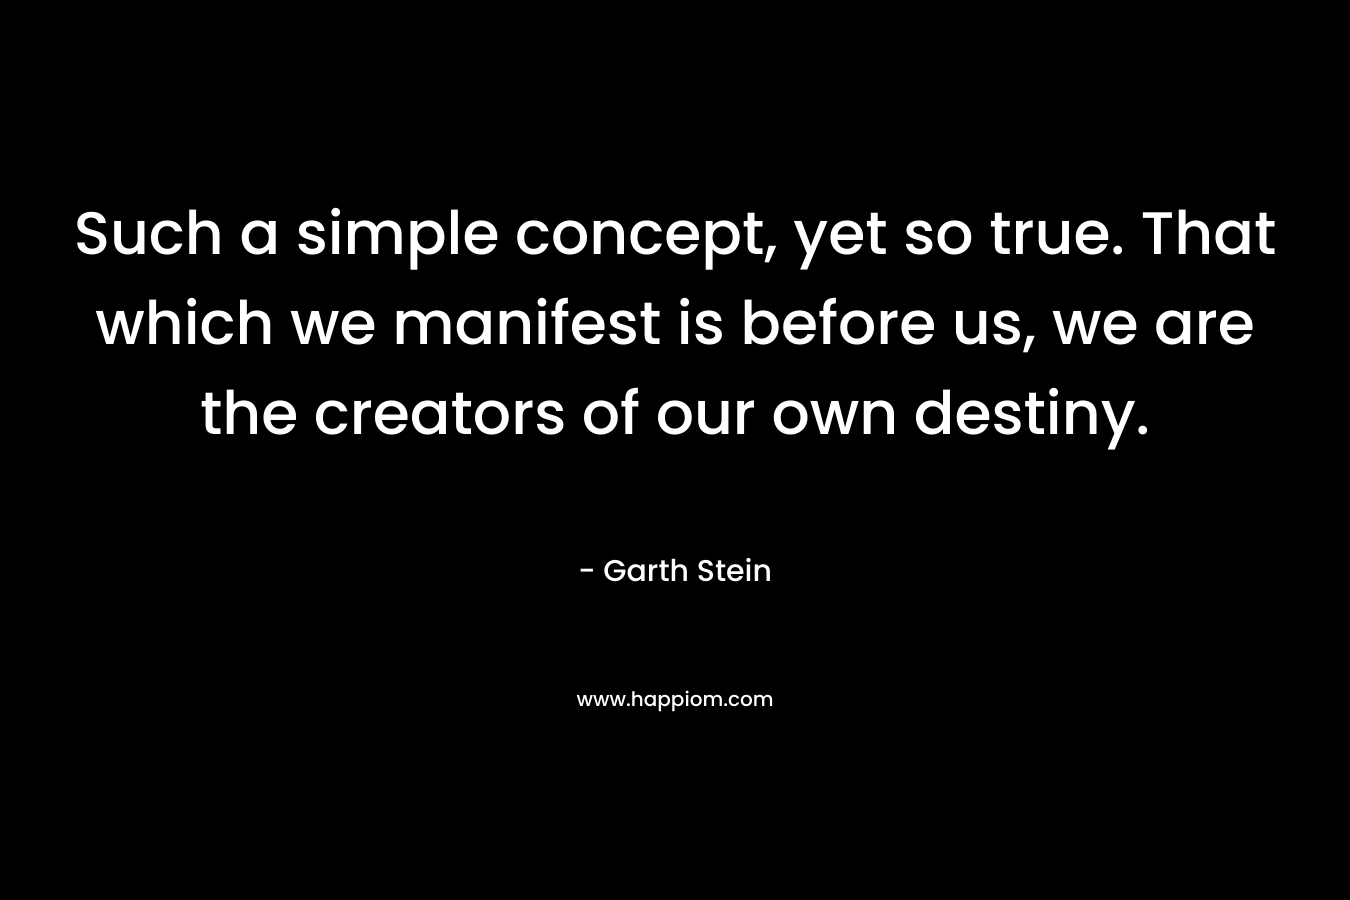 Such a simple concept, yet so true. That which we manifest is before us, we are the creators of our own destiny.